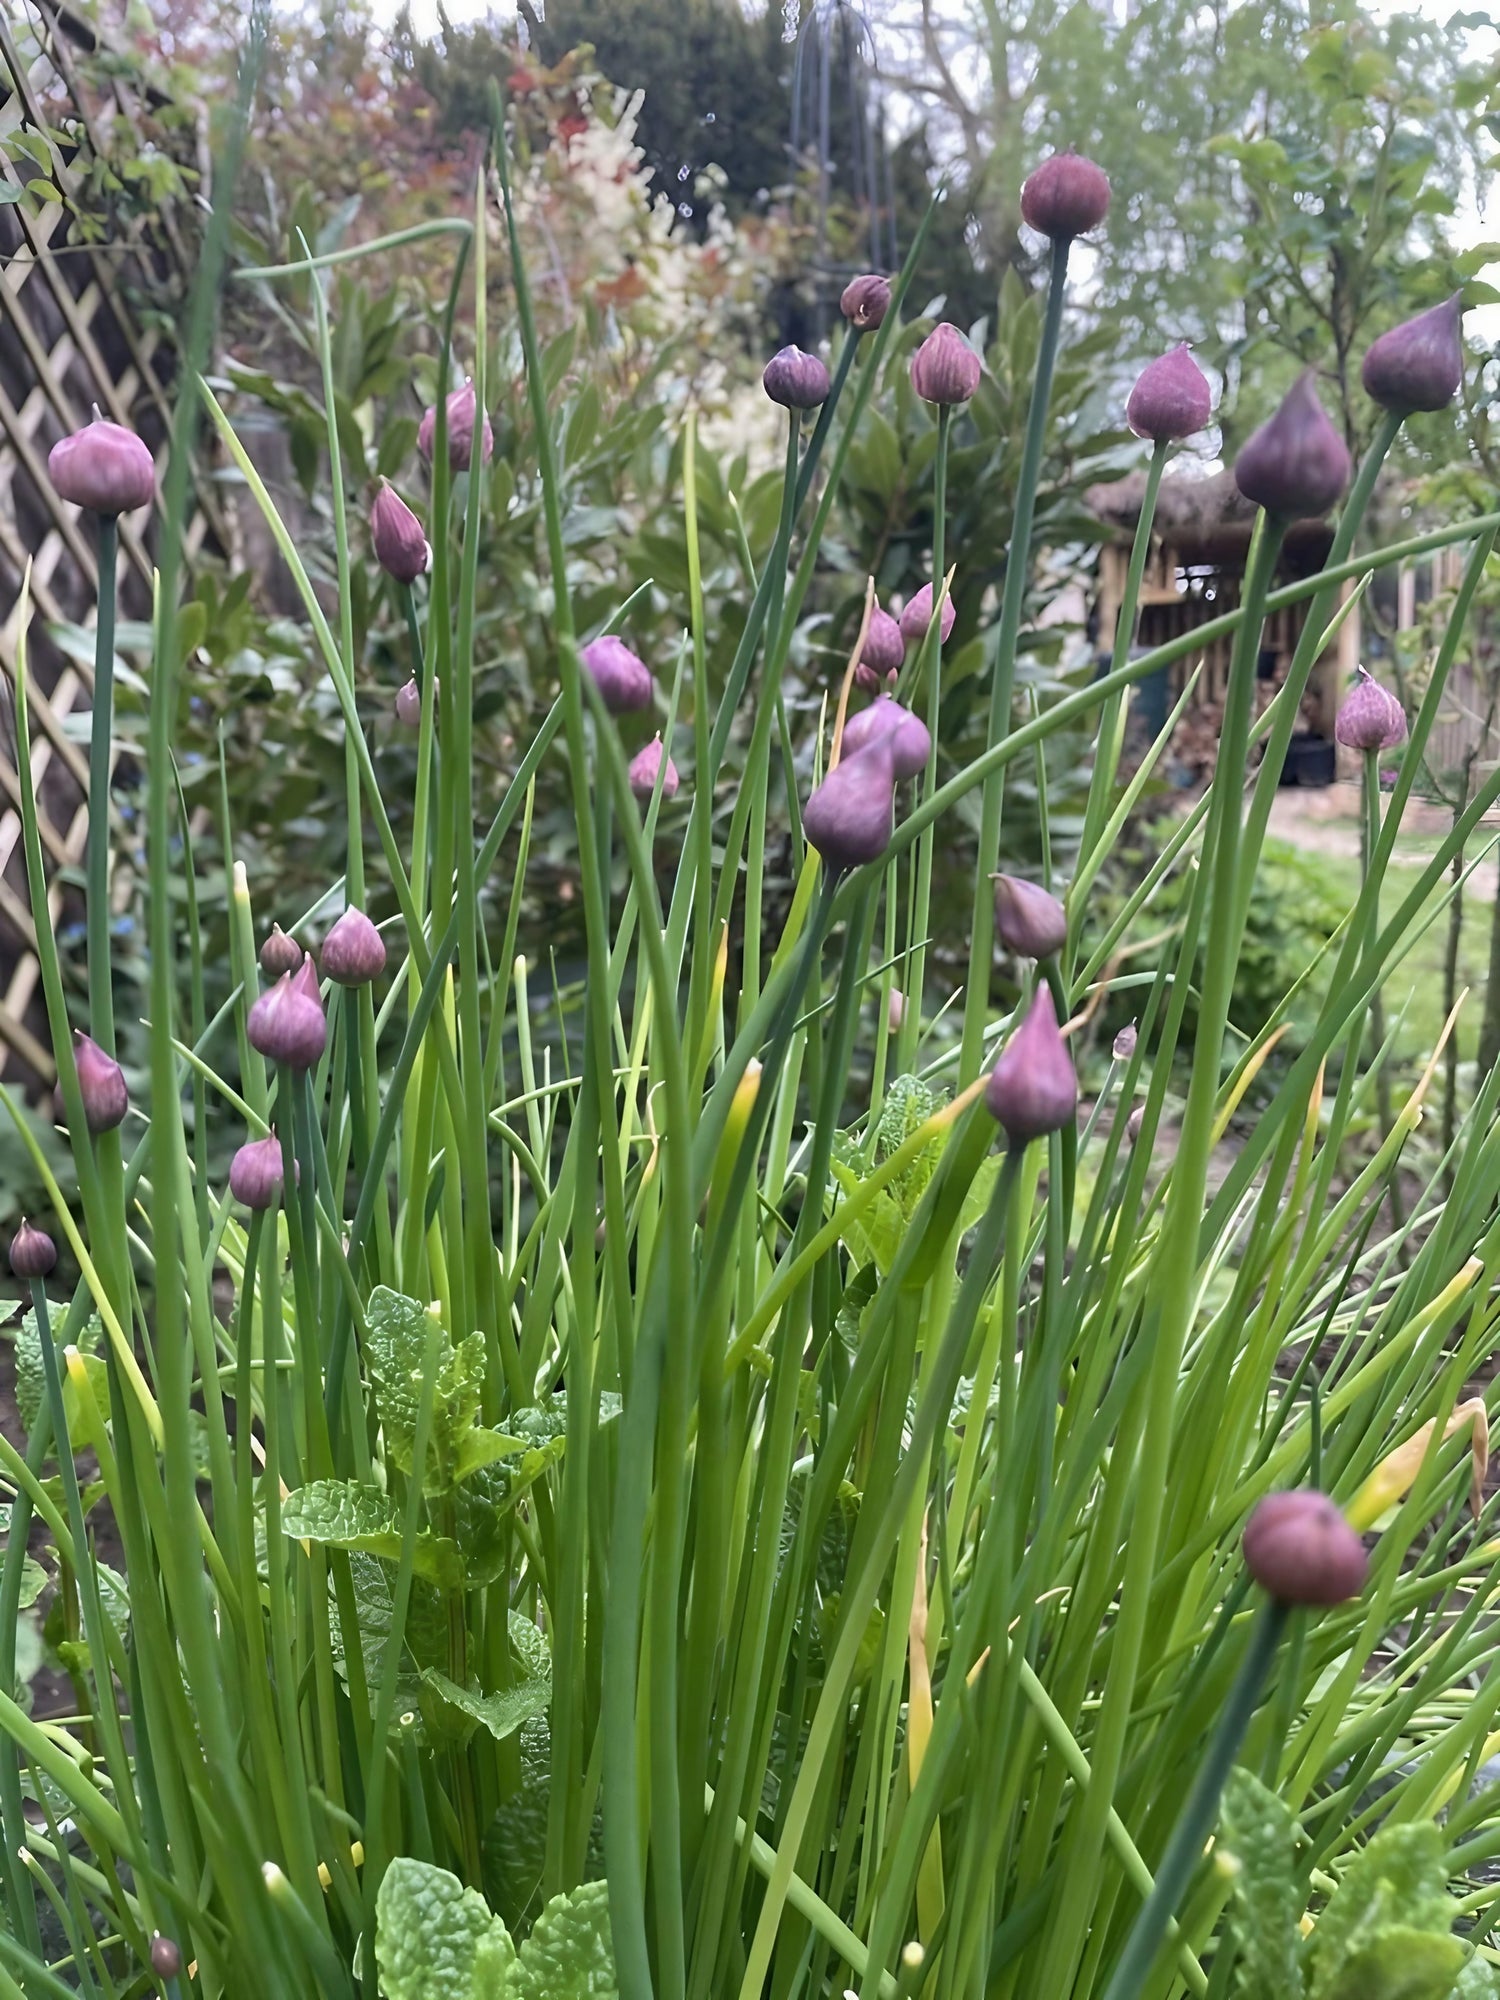 Close-up of chive plants with purple blooms in an outdoor garden